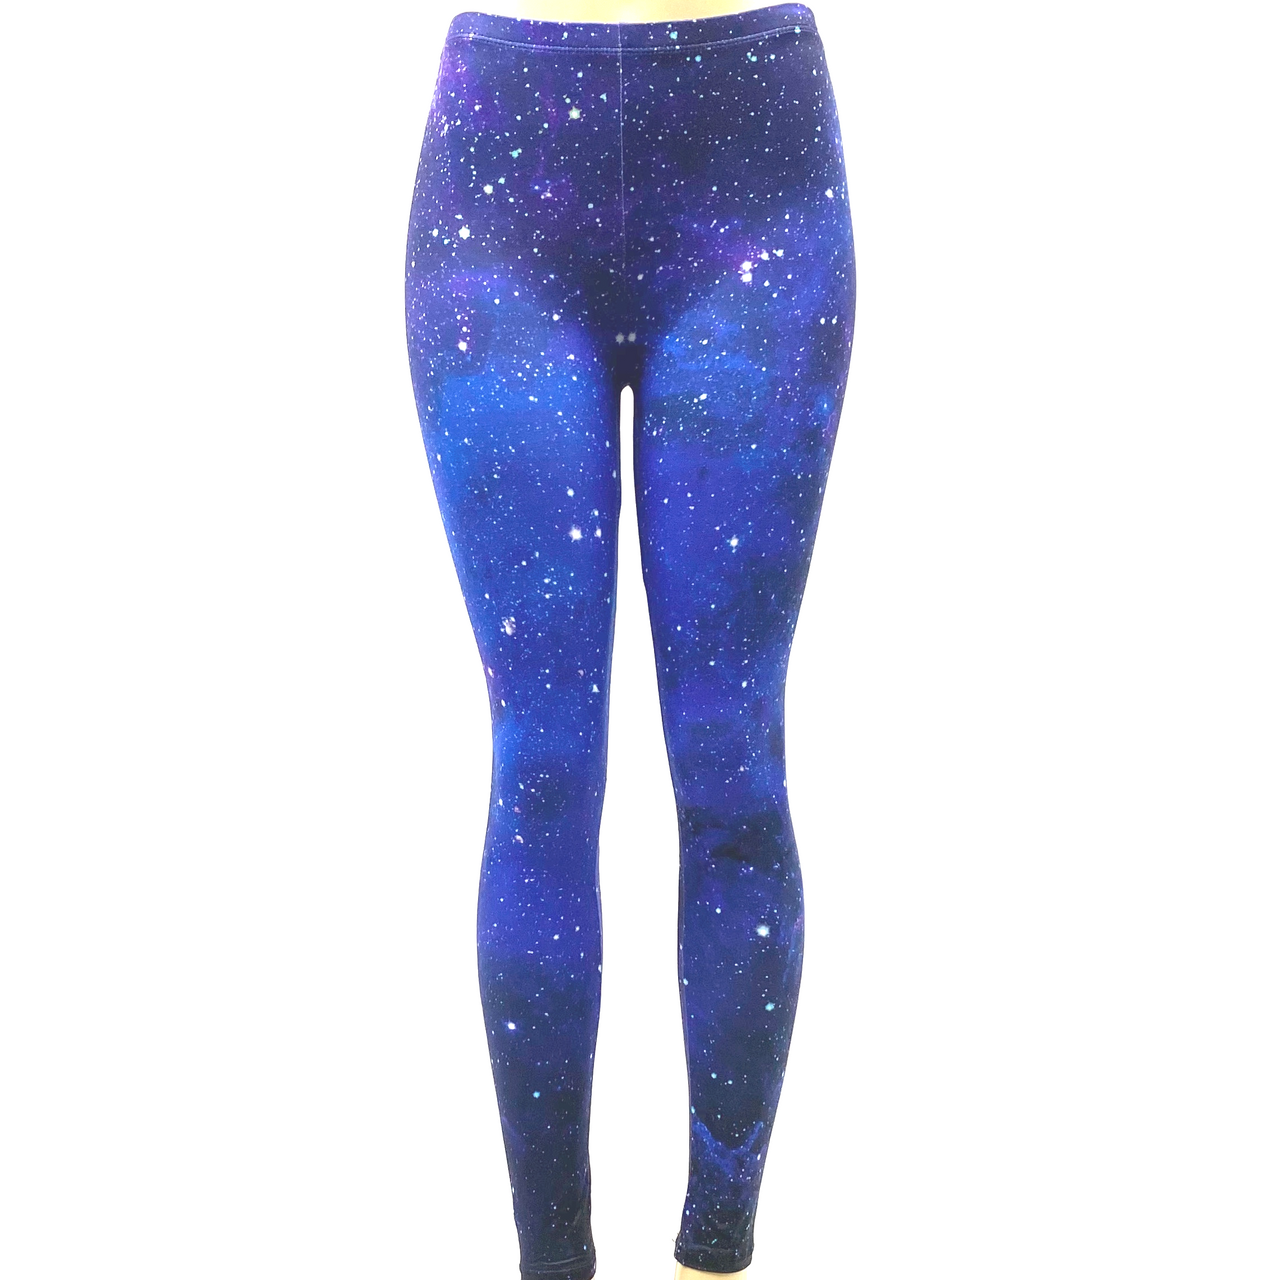 Galaxy Leggings, Yoga Space Print Pants, Cosmic Celestial Constellation  Outer Space Star Royal Blue Workout Leggings -  New Zealand